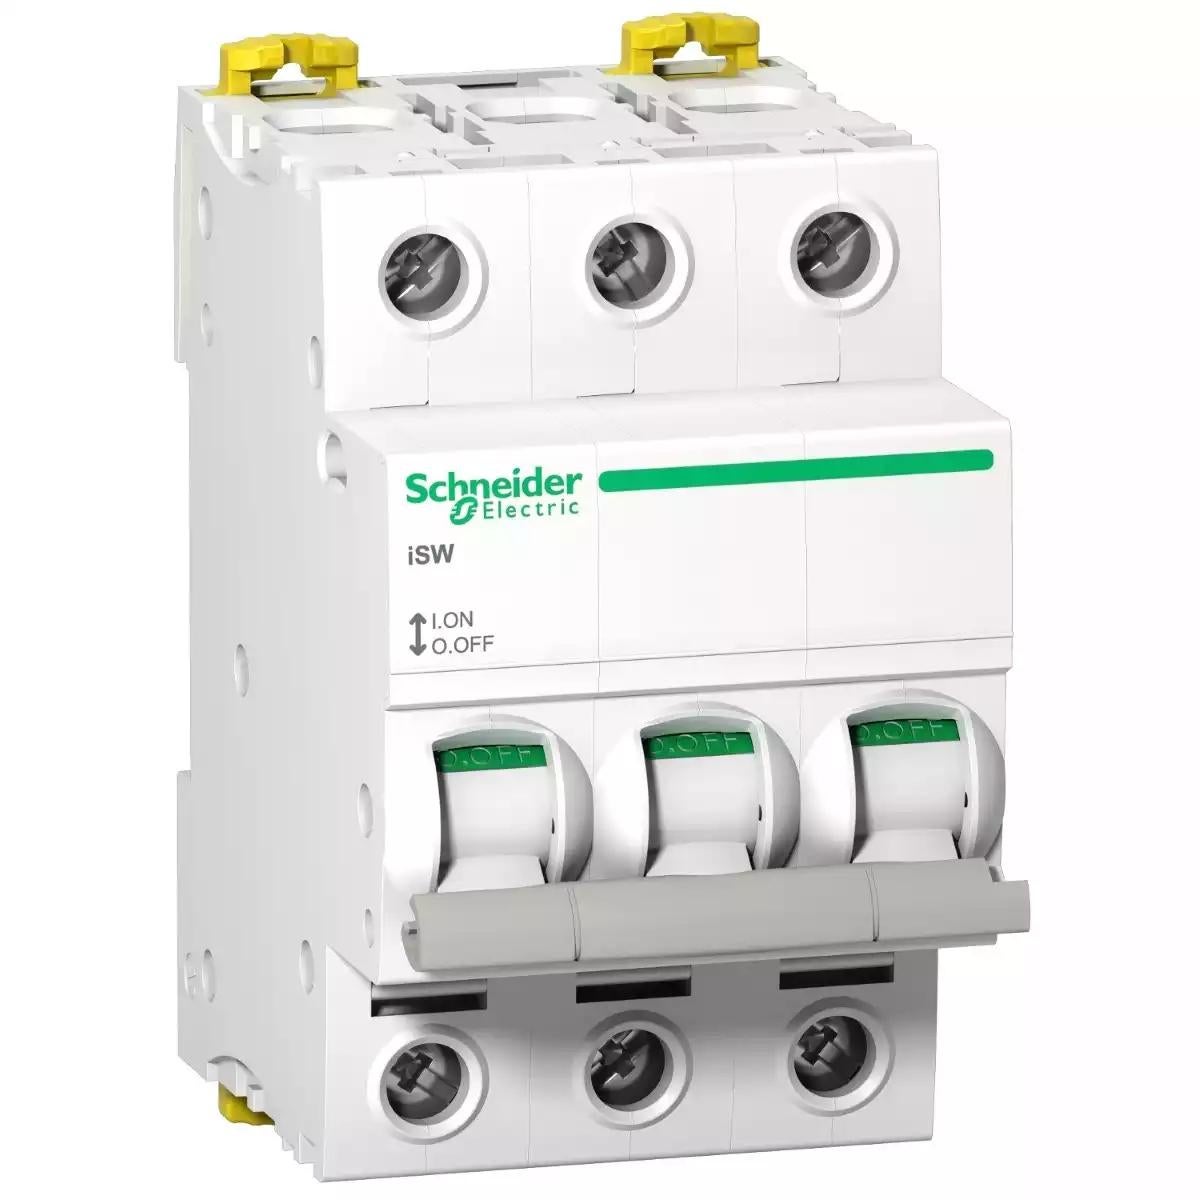 Schneider Electric Acti 9 iSW - 3P - 125 A - 415 V